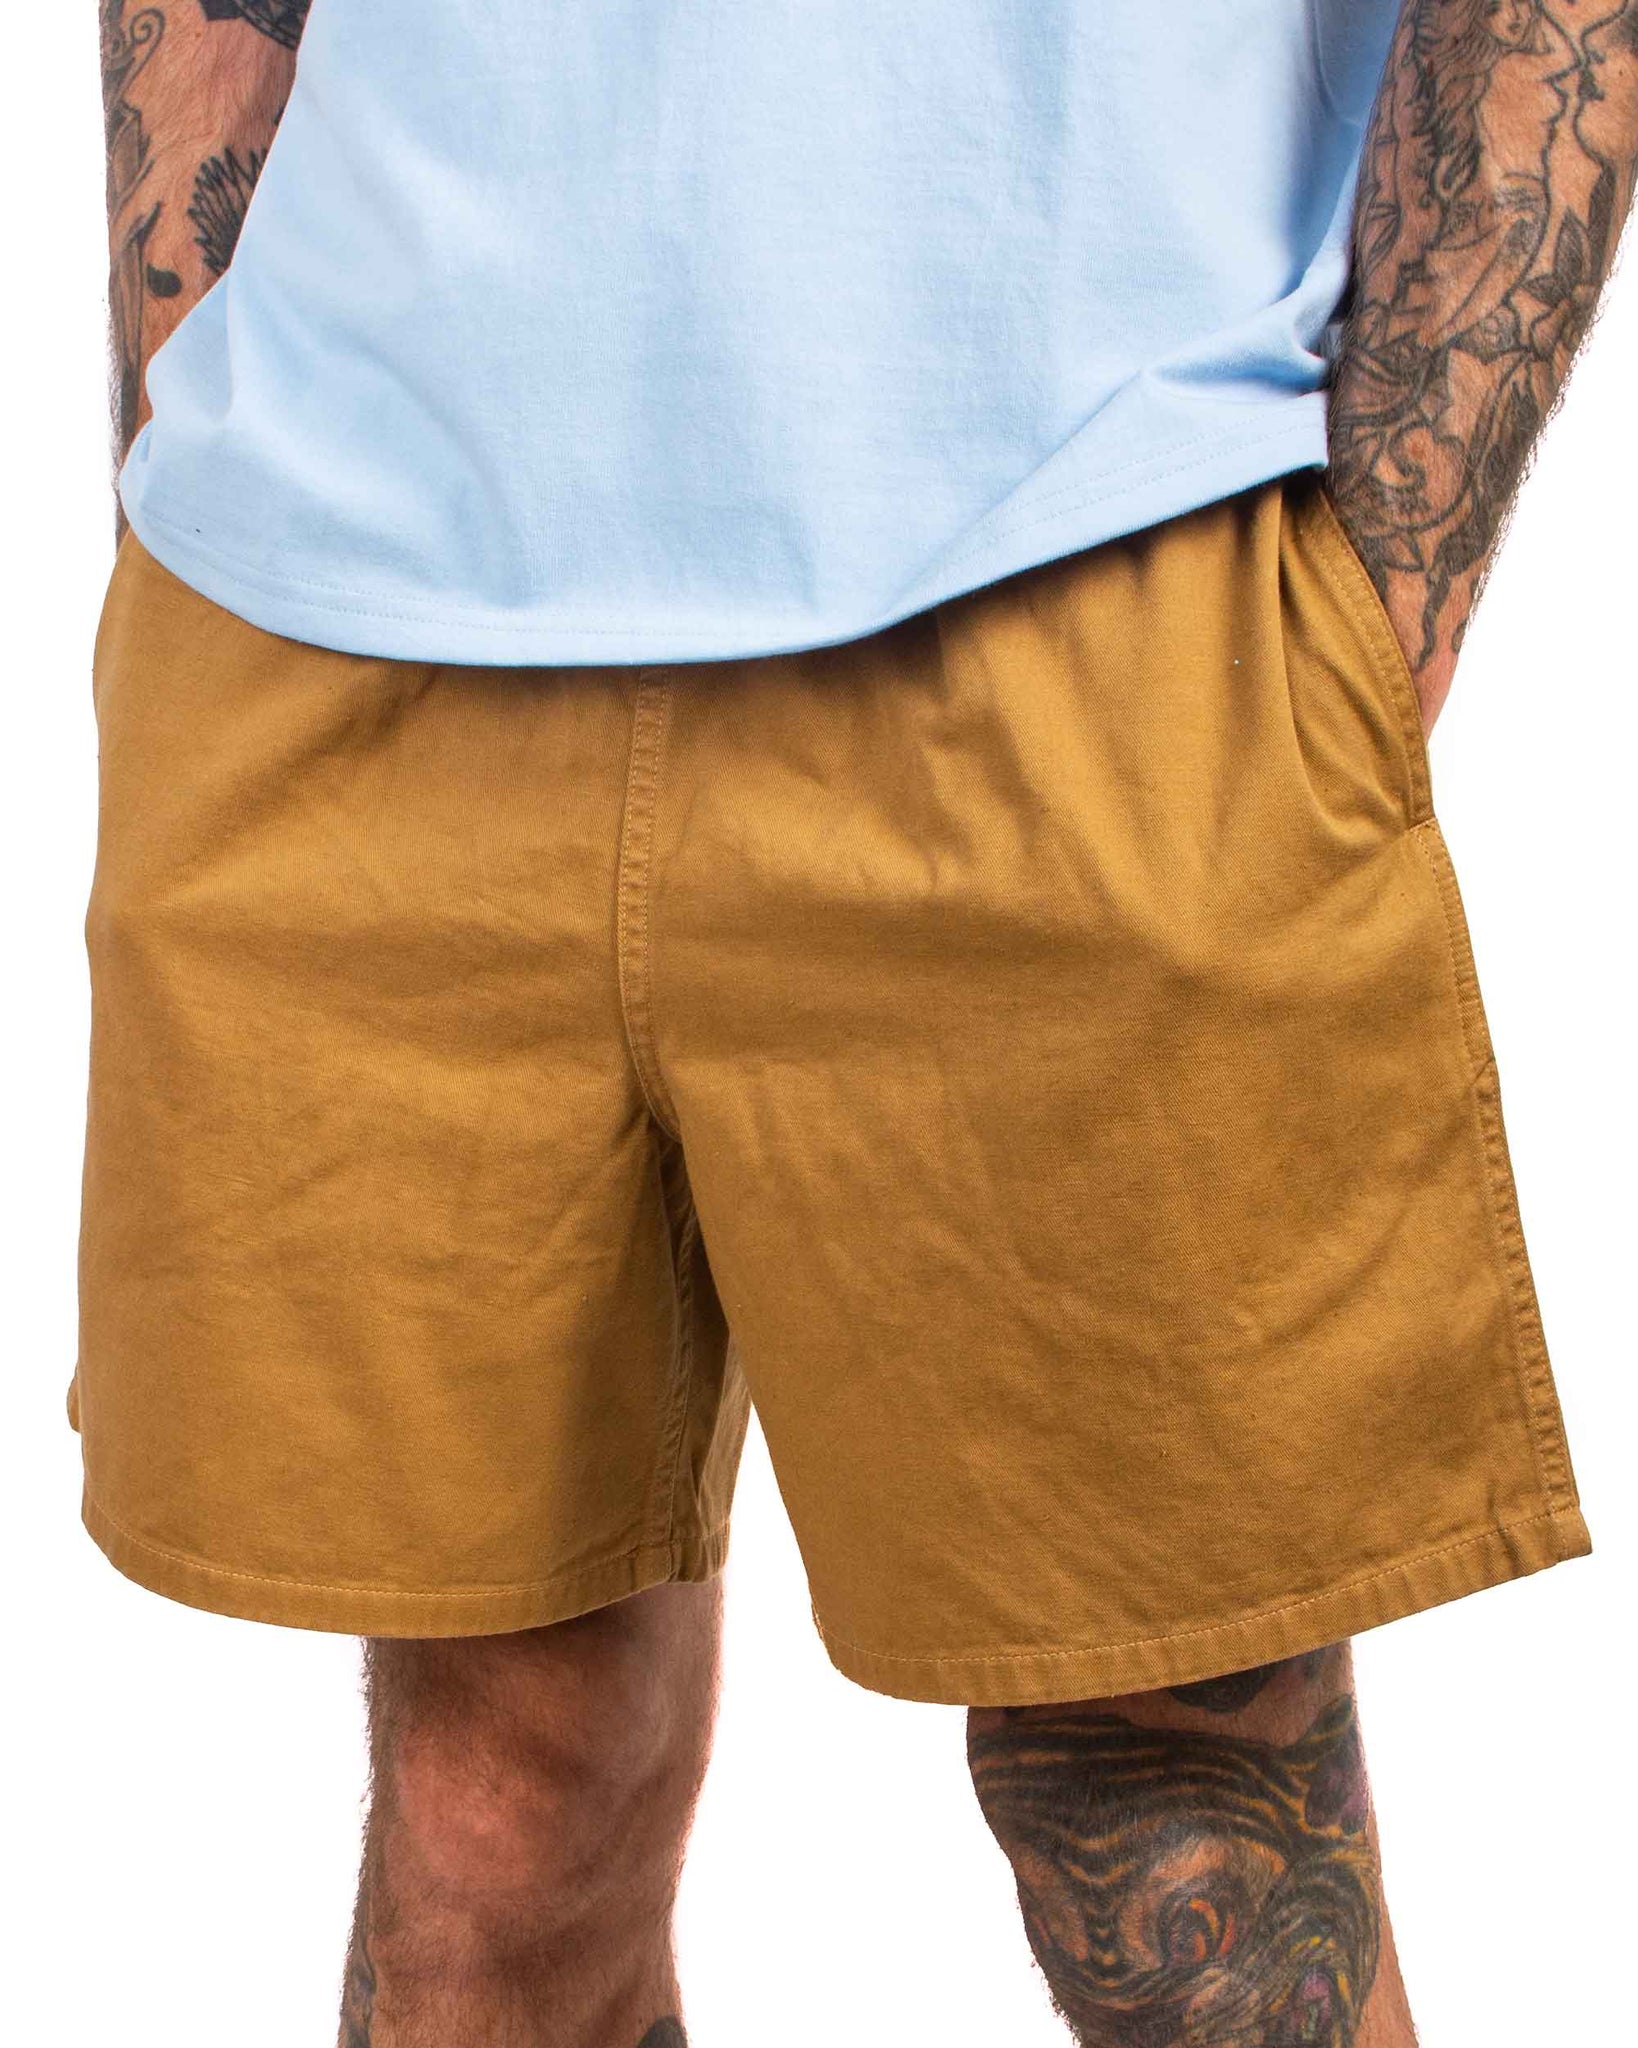 The Real McCoy's MP22015 Cotton Drill Swim Shorts (Over-Dyed) Chestnut CloseThe Real McCoy's MP22015 Cotton Drill Swim Shorts (Over-Dyed) Chestnut Details